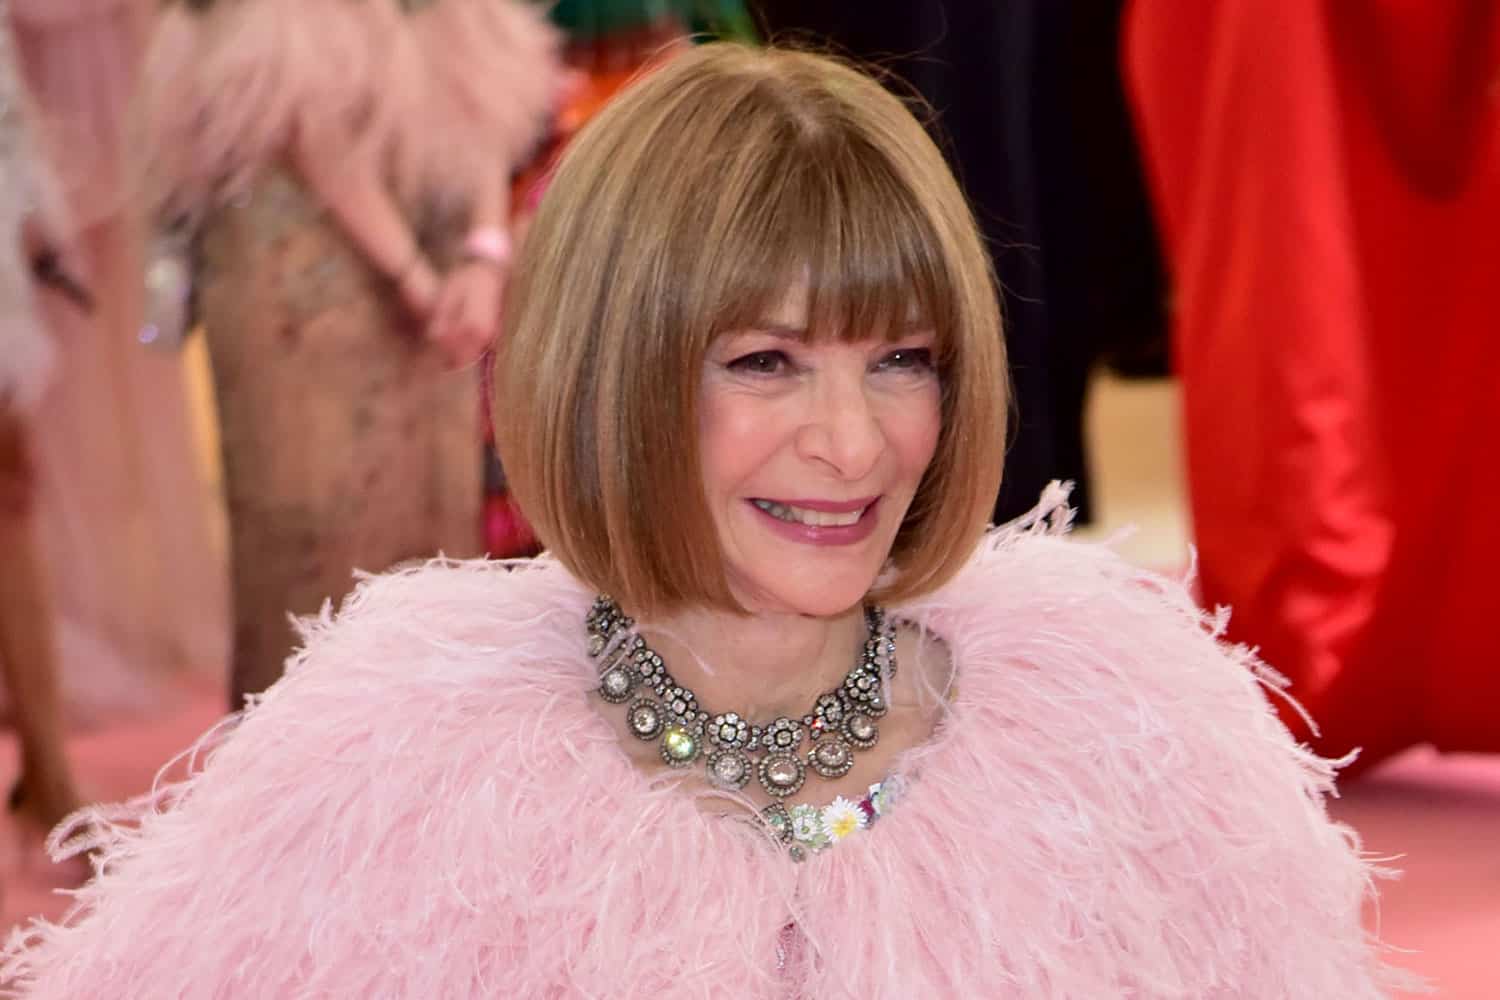 Anna Wintour To Speak at Teen Vogue's Commencement - Daily Front Row